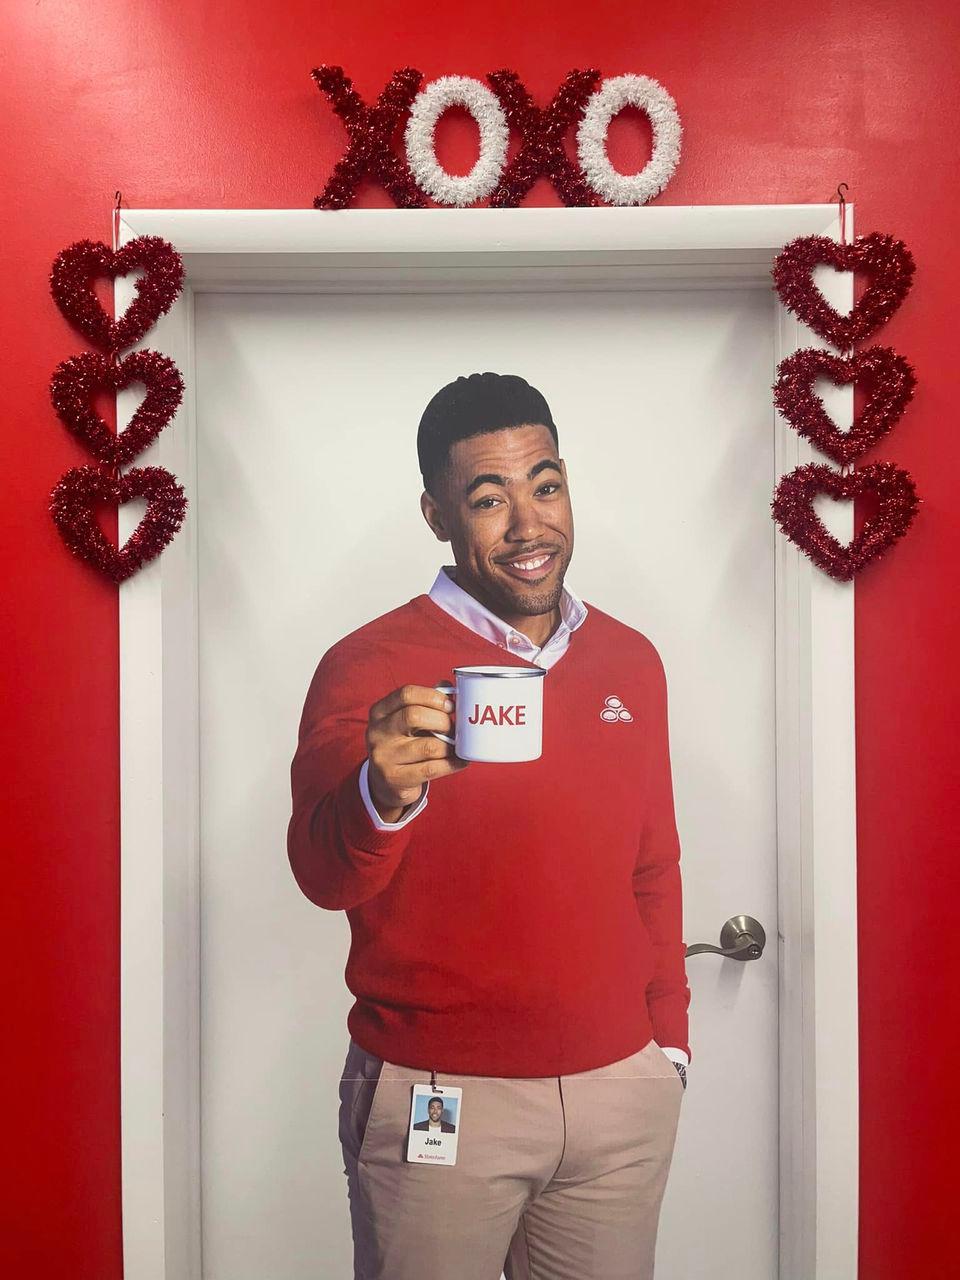 Celebrating Valentines Day with love and happiness at John Servider State Farm Office! Sending warm wishes to all out customers and friends! ❤️ Spread the love and make every day feel like Valentines Day!